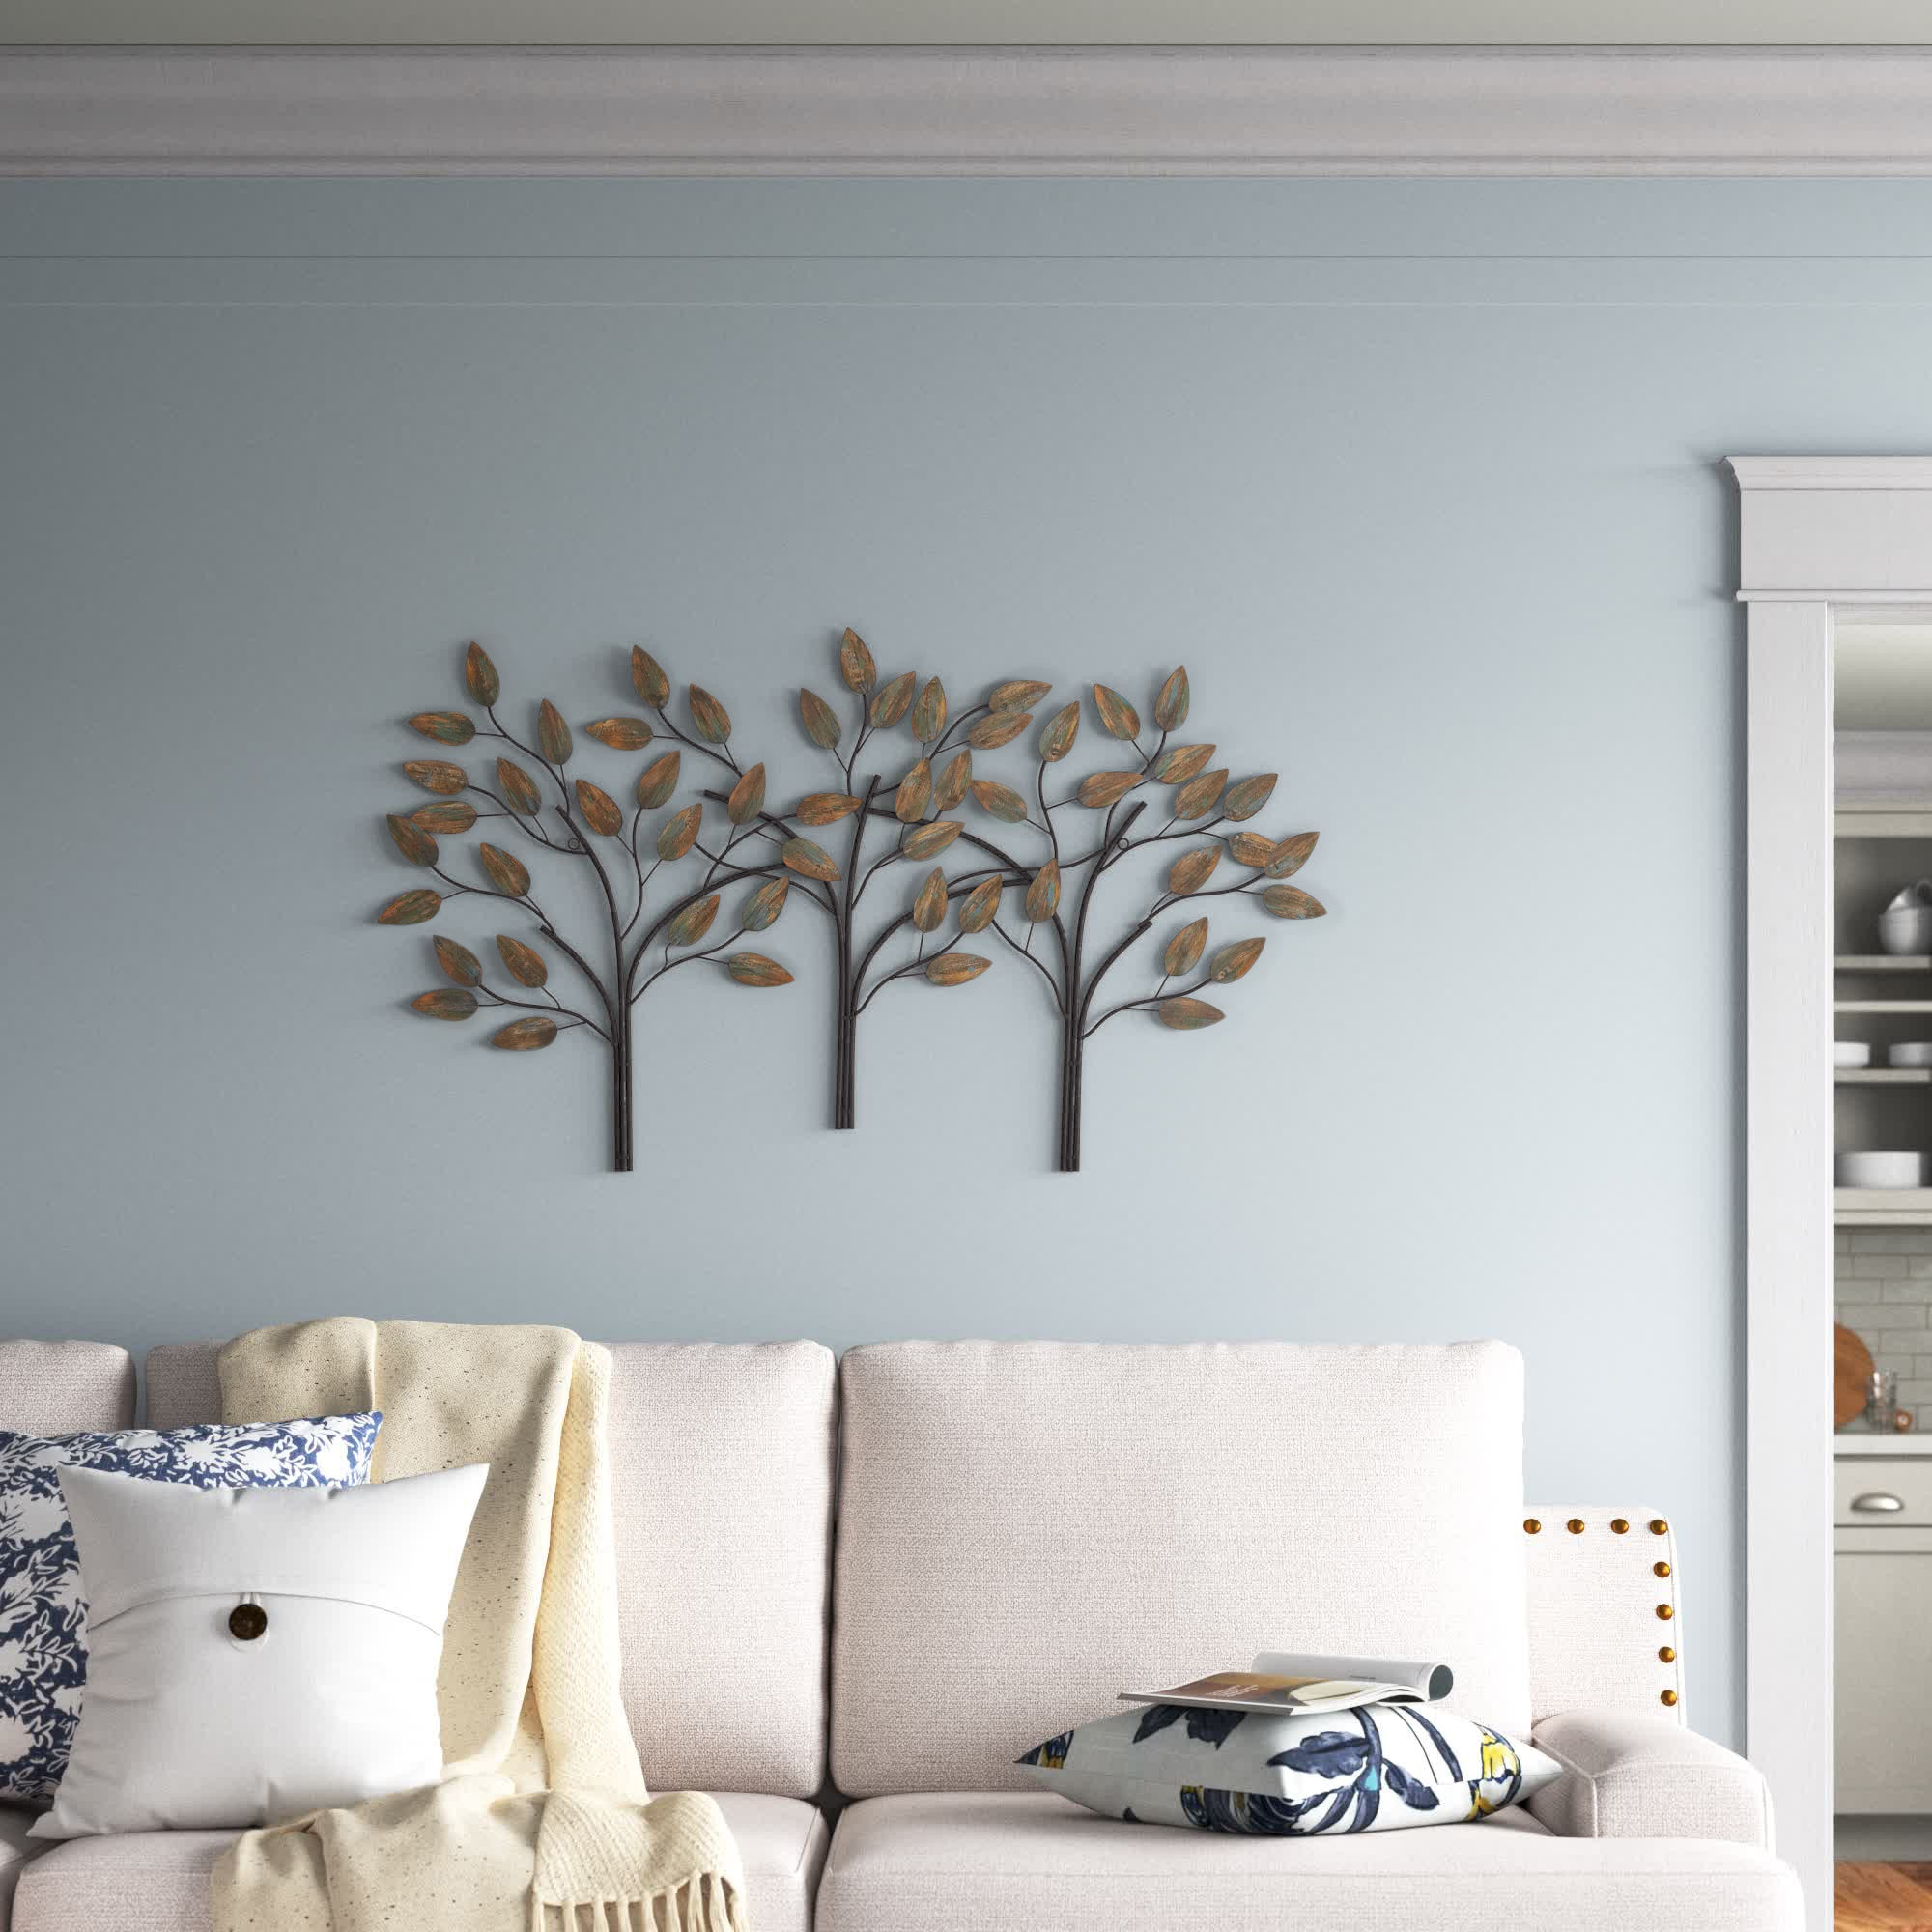 Traditional Landscape & Nature Wall Decor on Metal